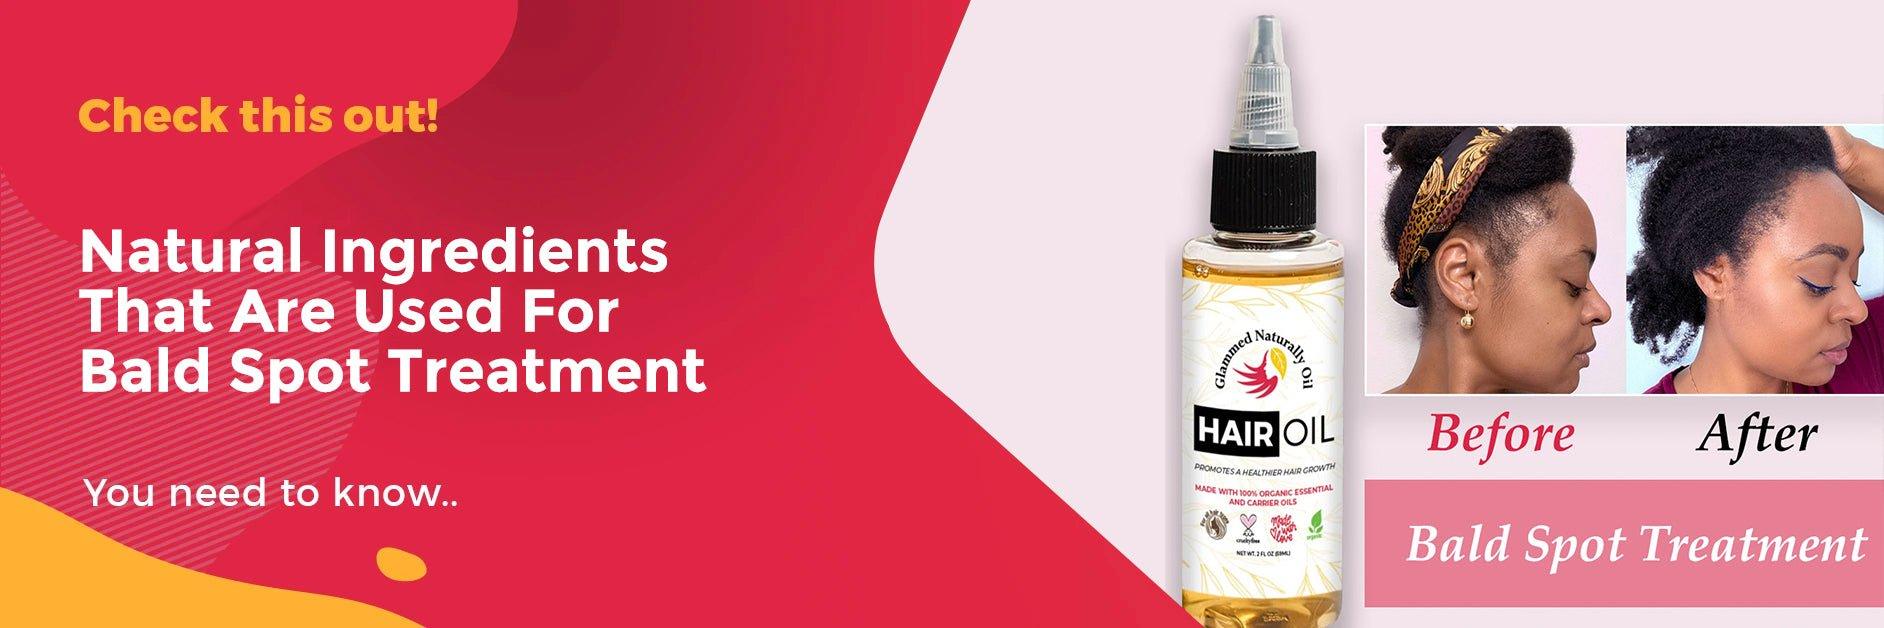 Natural Ingredients That Are Used For Bald Spot Treatment - GlammedNaturallyOil